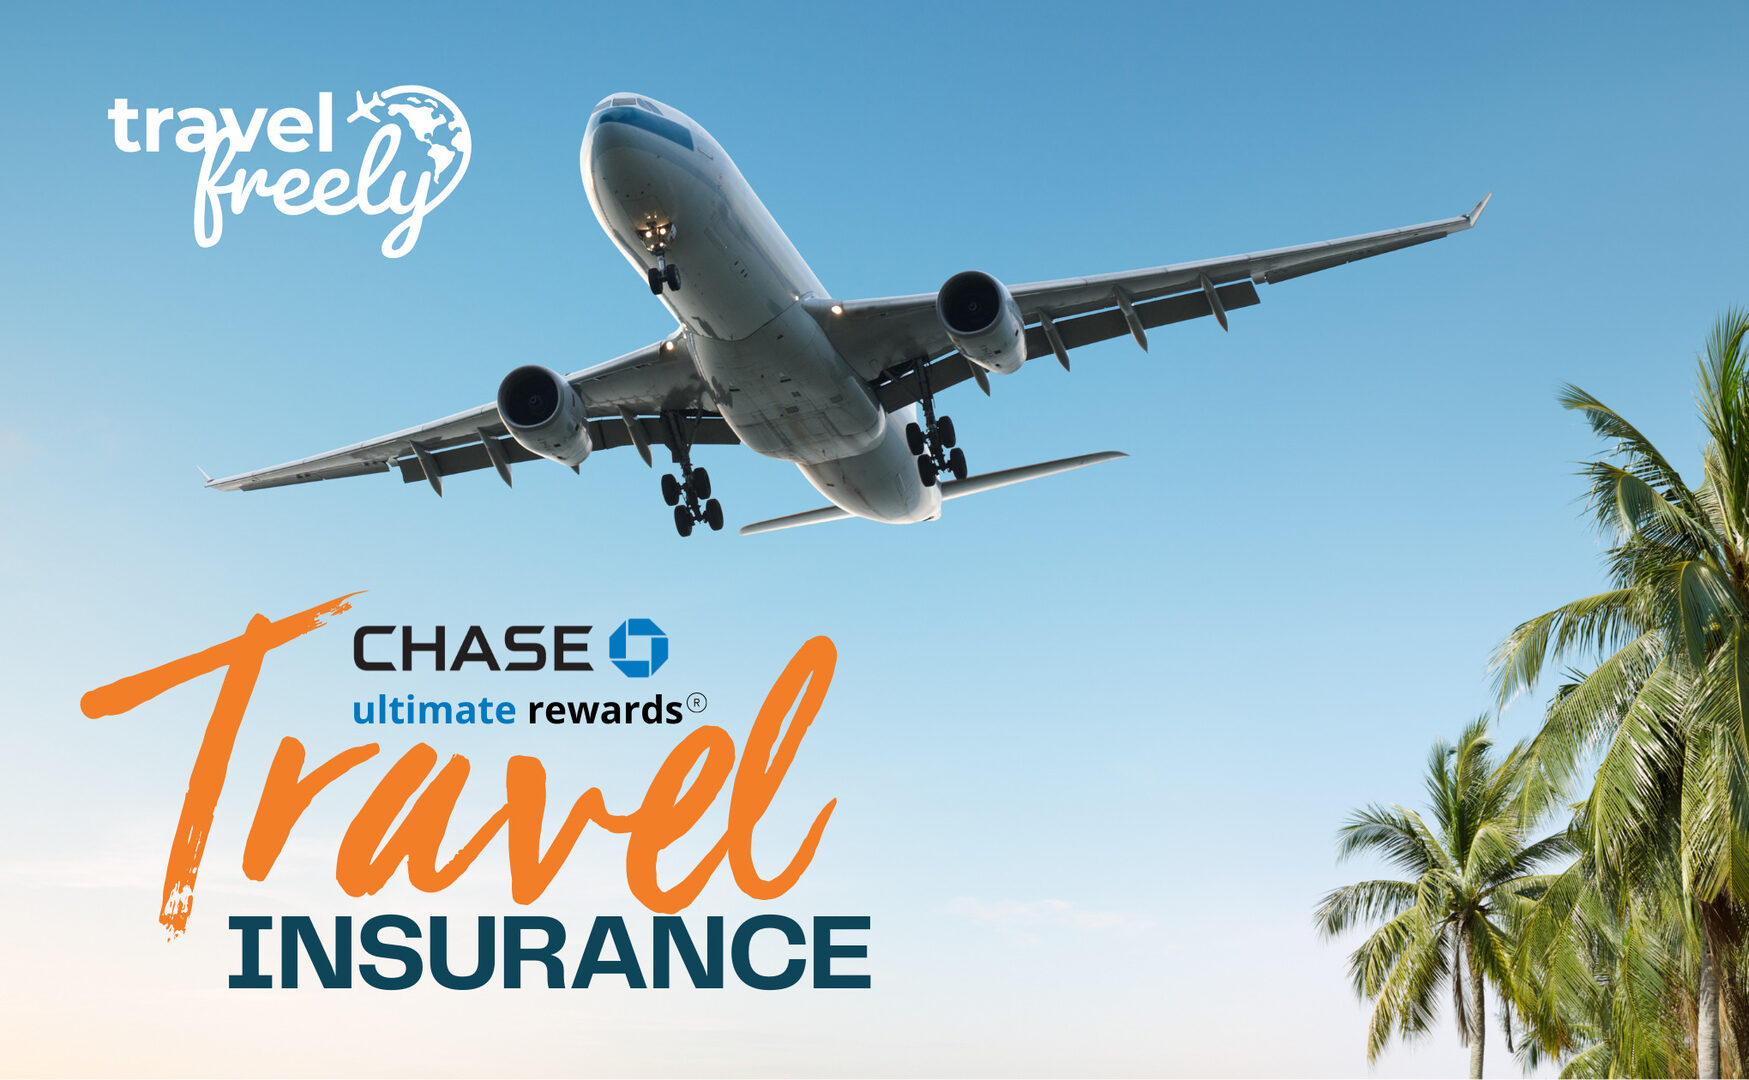 chase eclaims travel insurance